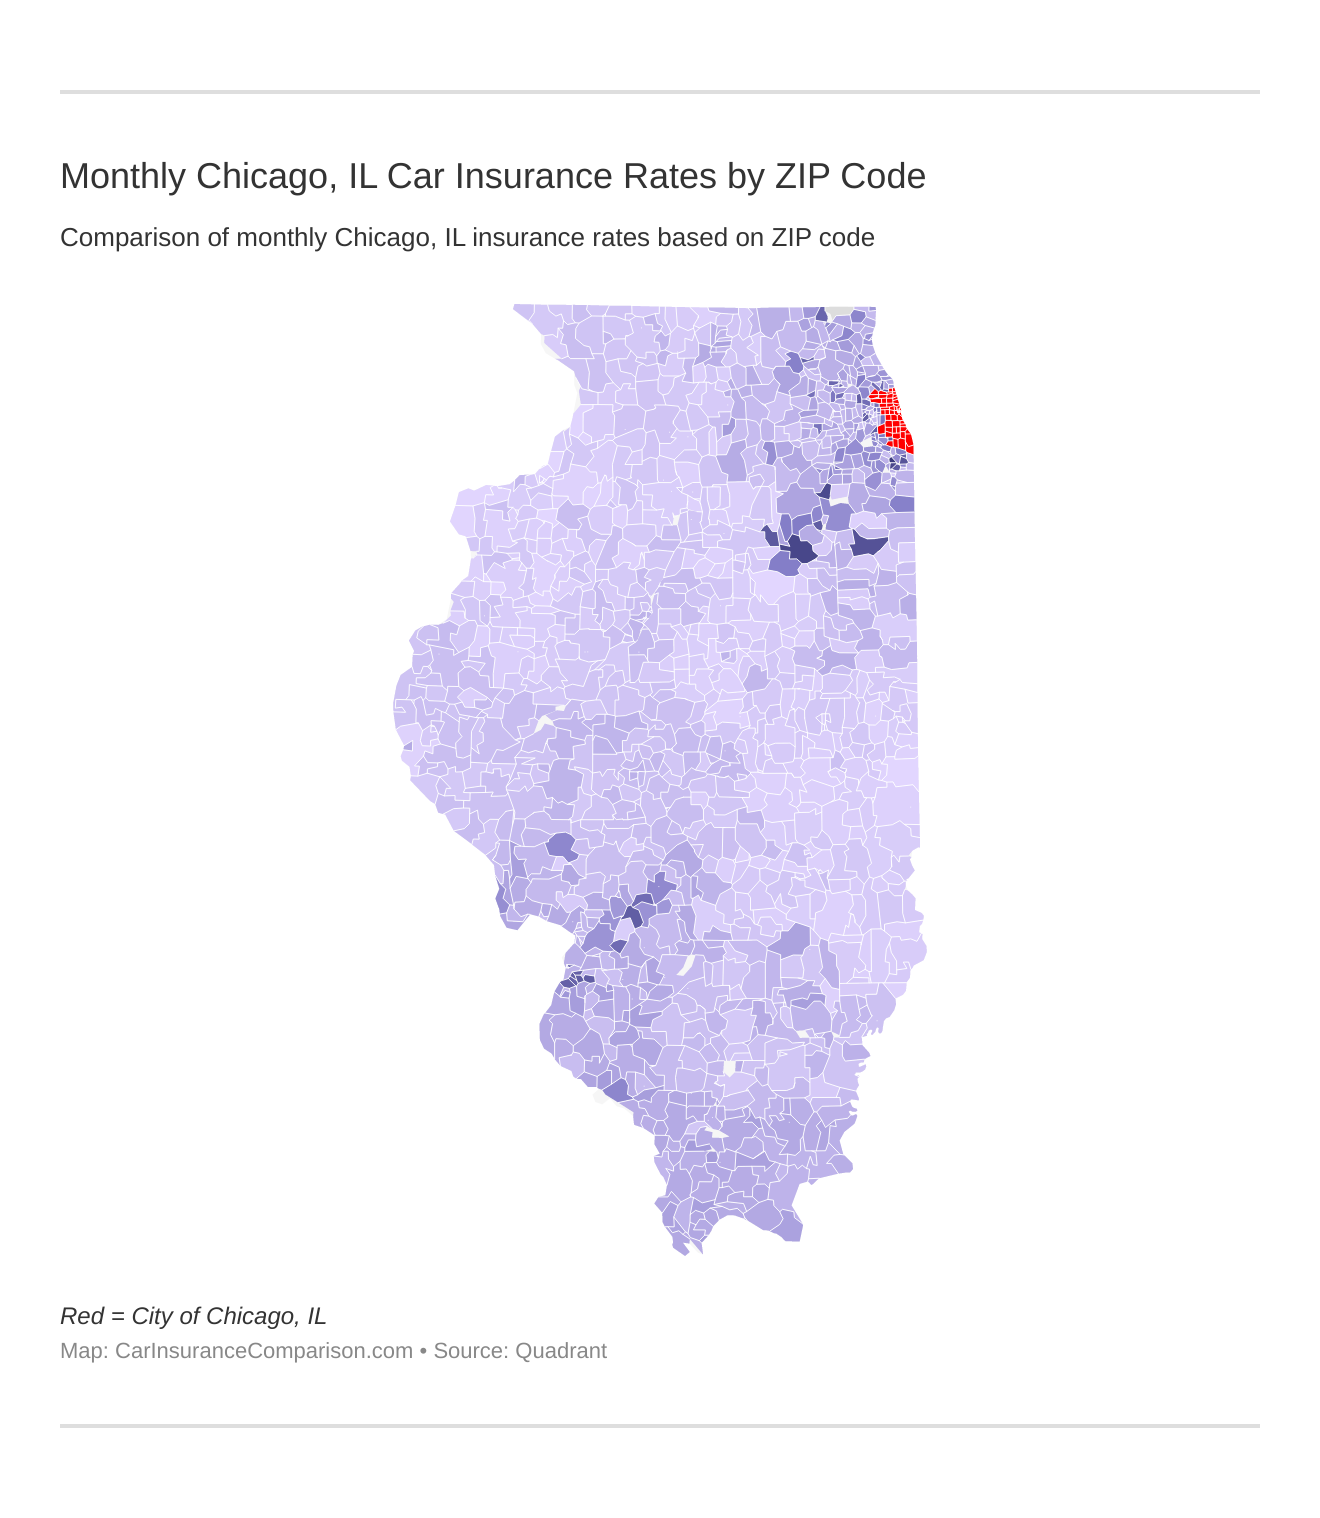 Monthly Chicago, IL Car Insurance Rates by ZIP Code